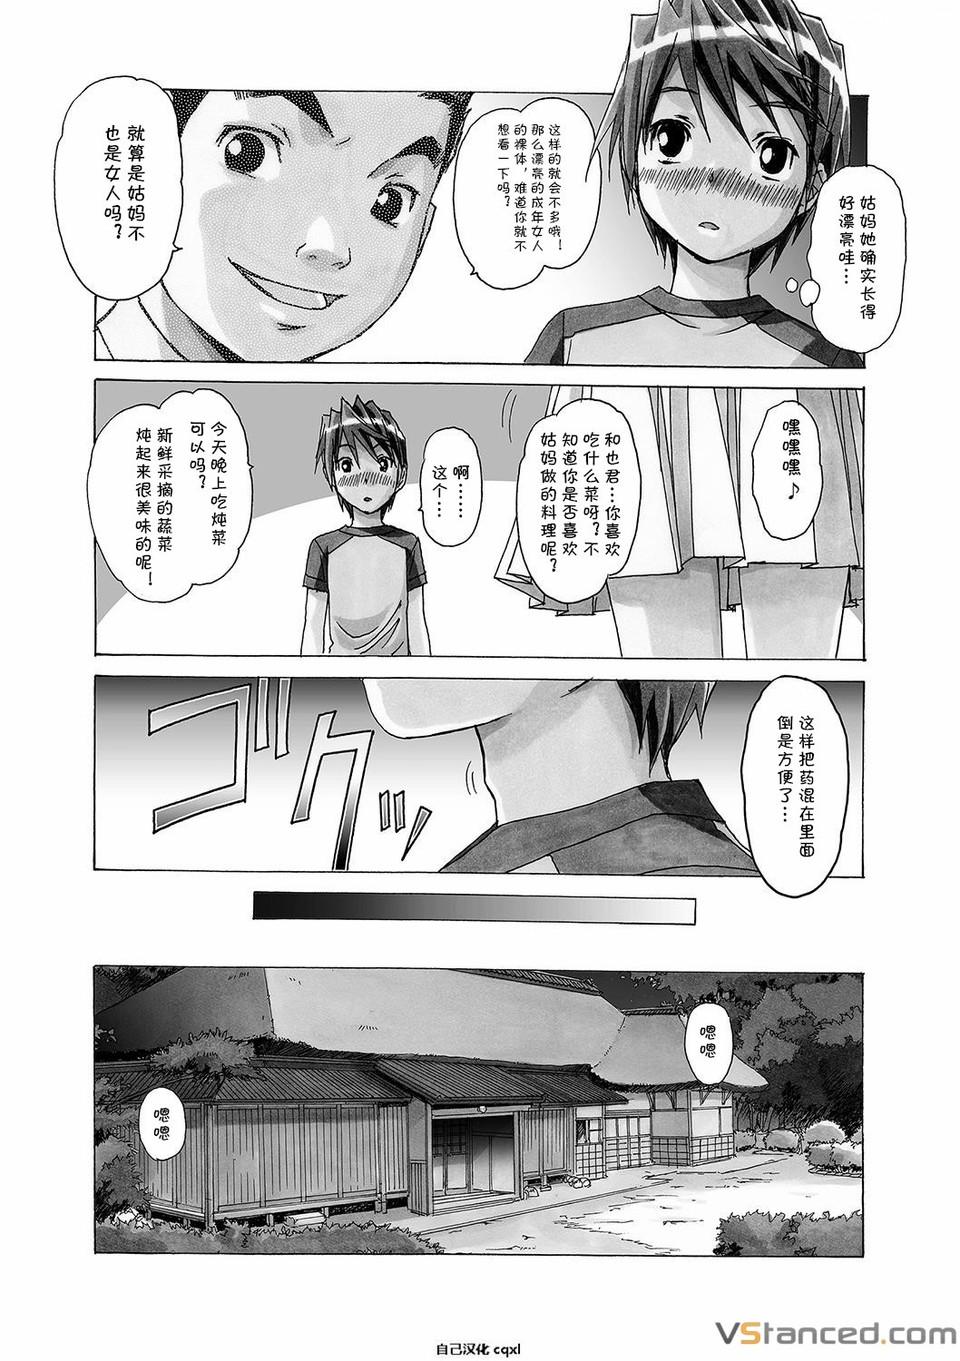 Spooning AKANE vol.03 - Original First Time - Page 10